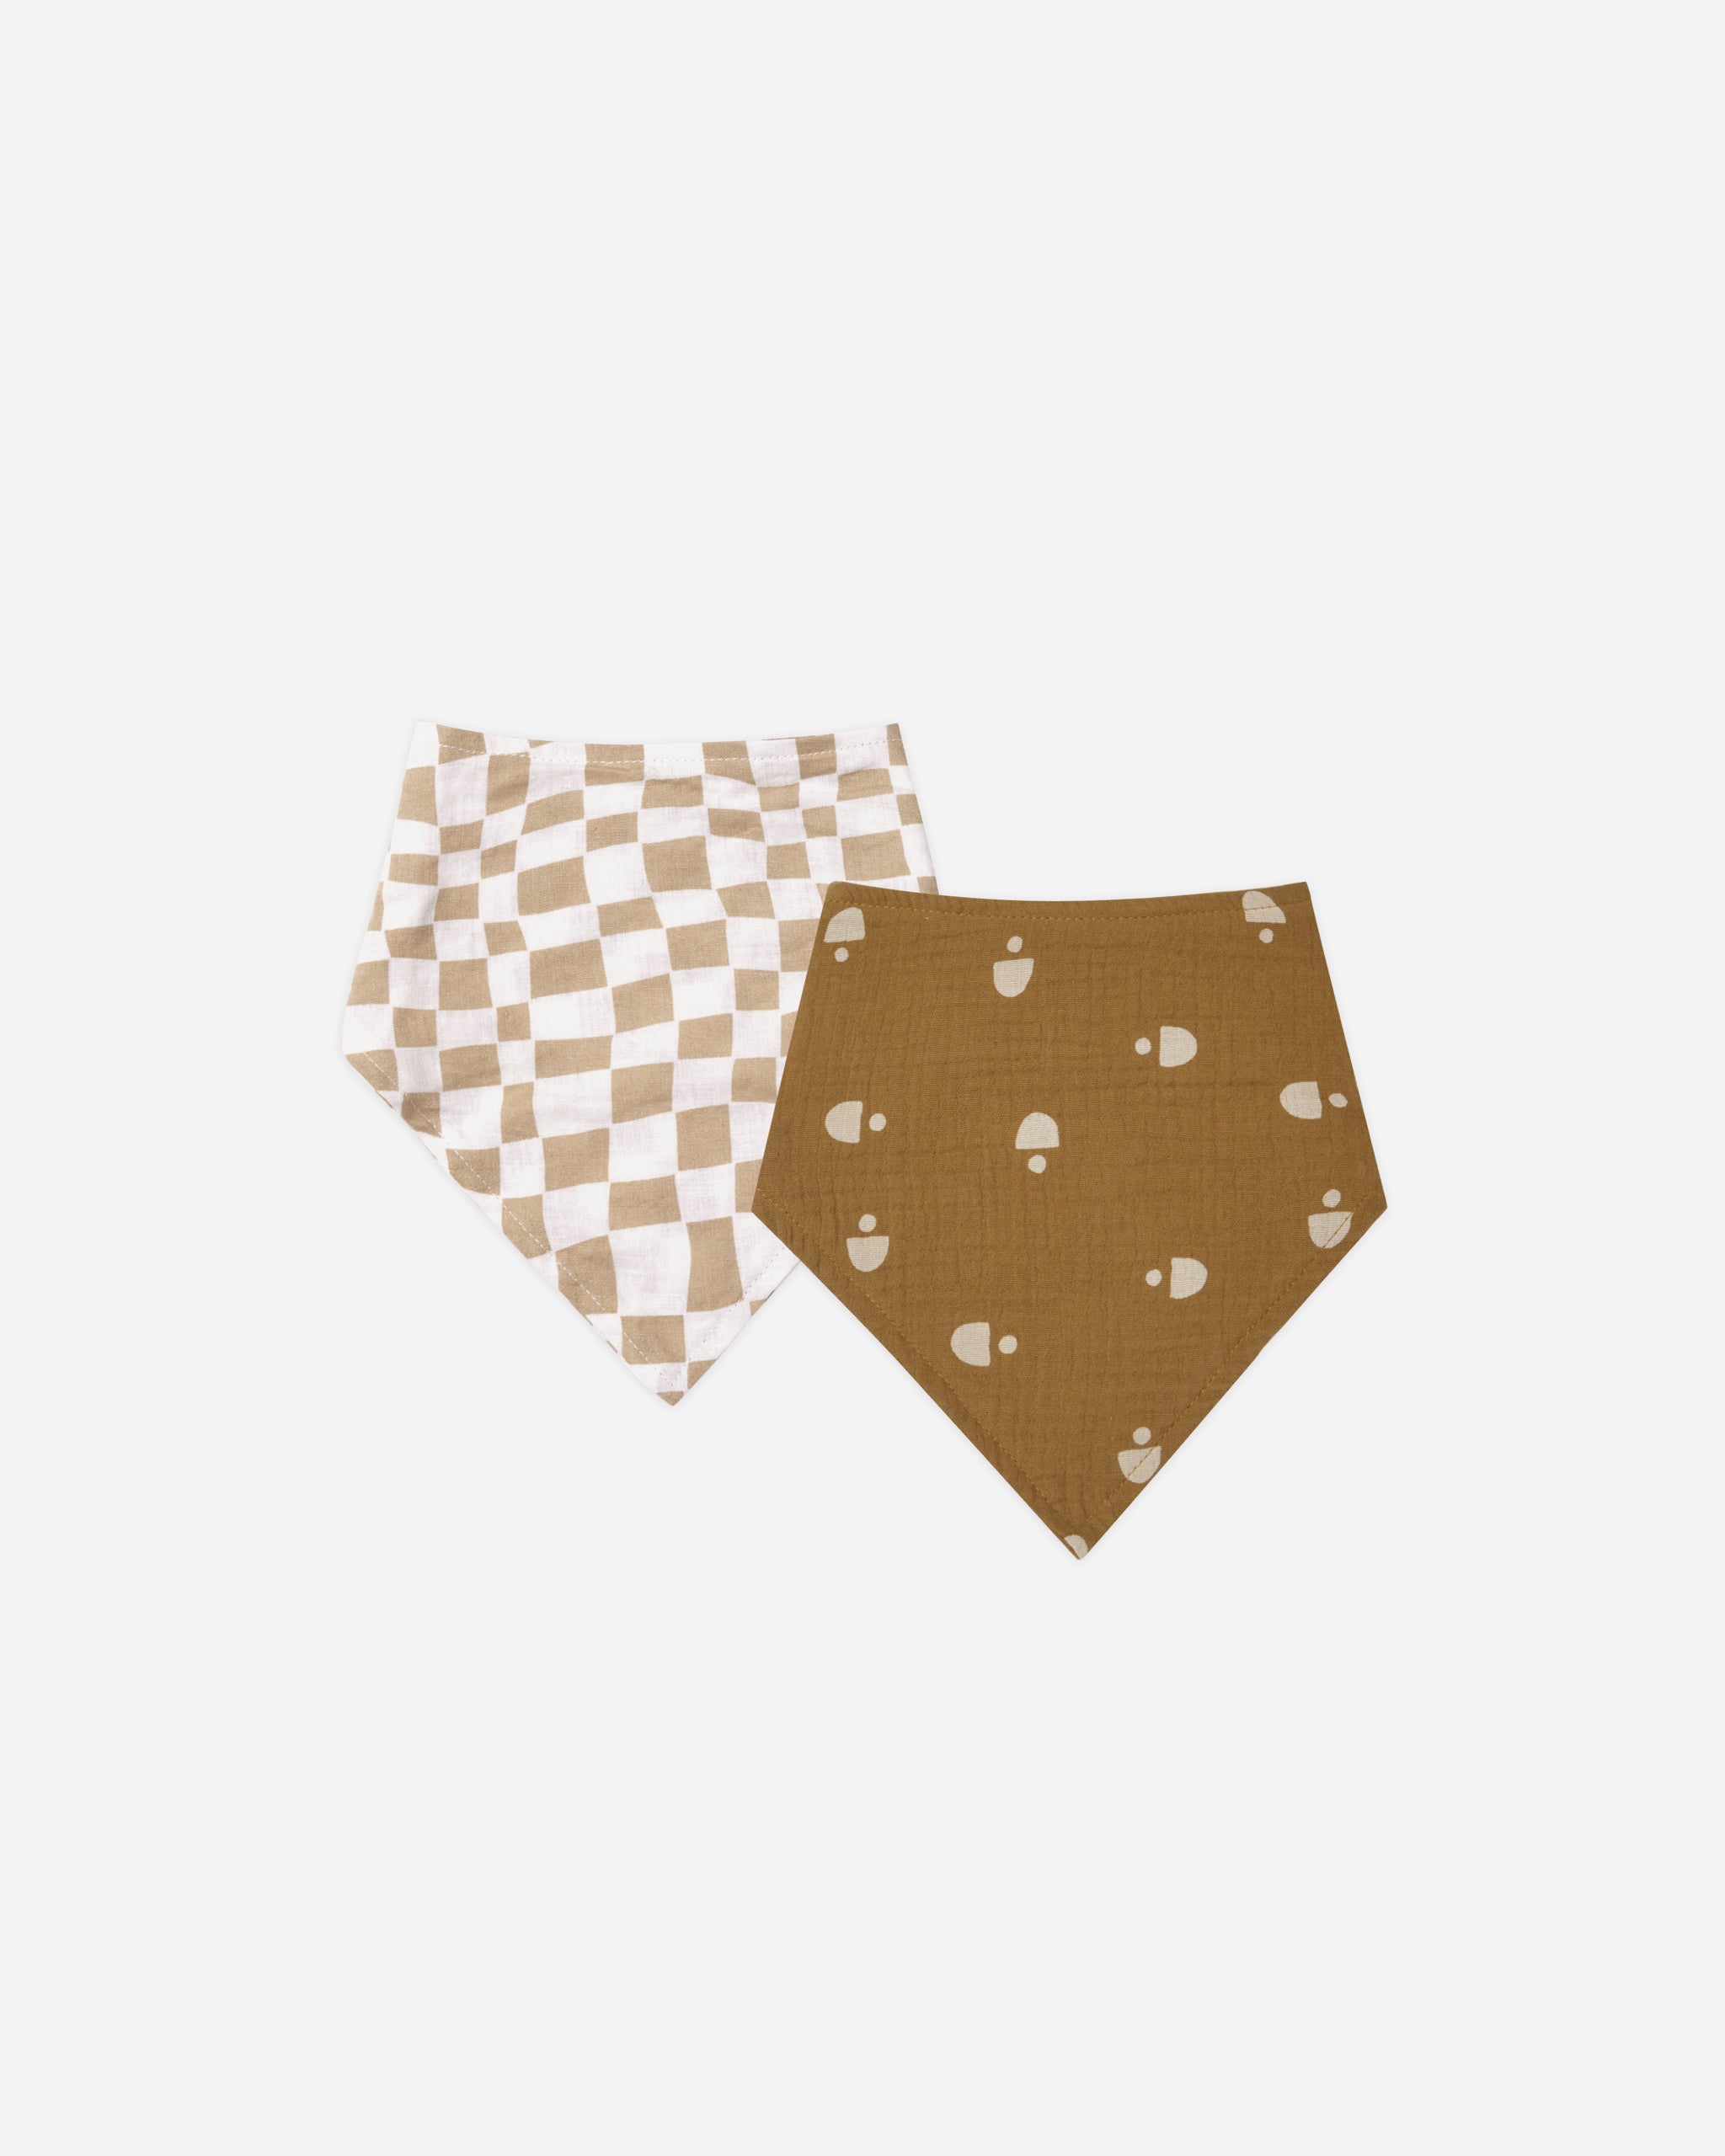 Scarf Bib Set || Sand Check, Geo - Rylee + Cru | Kids Clothes | Trendy Baby Clothes | Modern Infant Outfits |